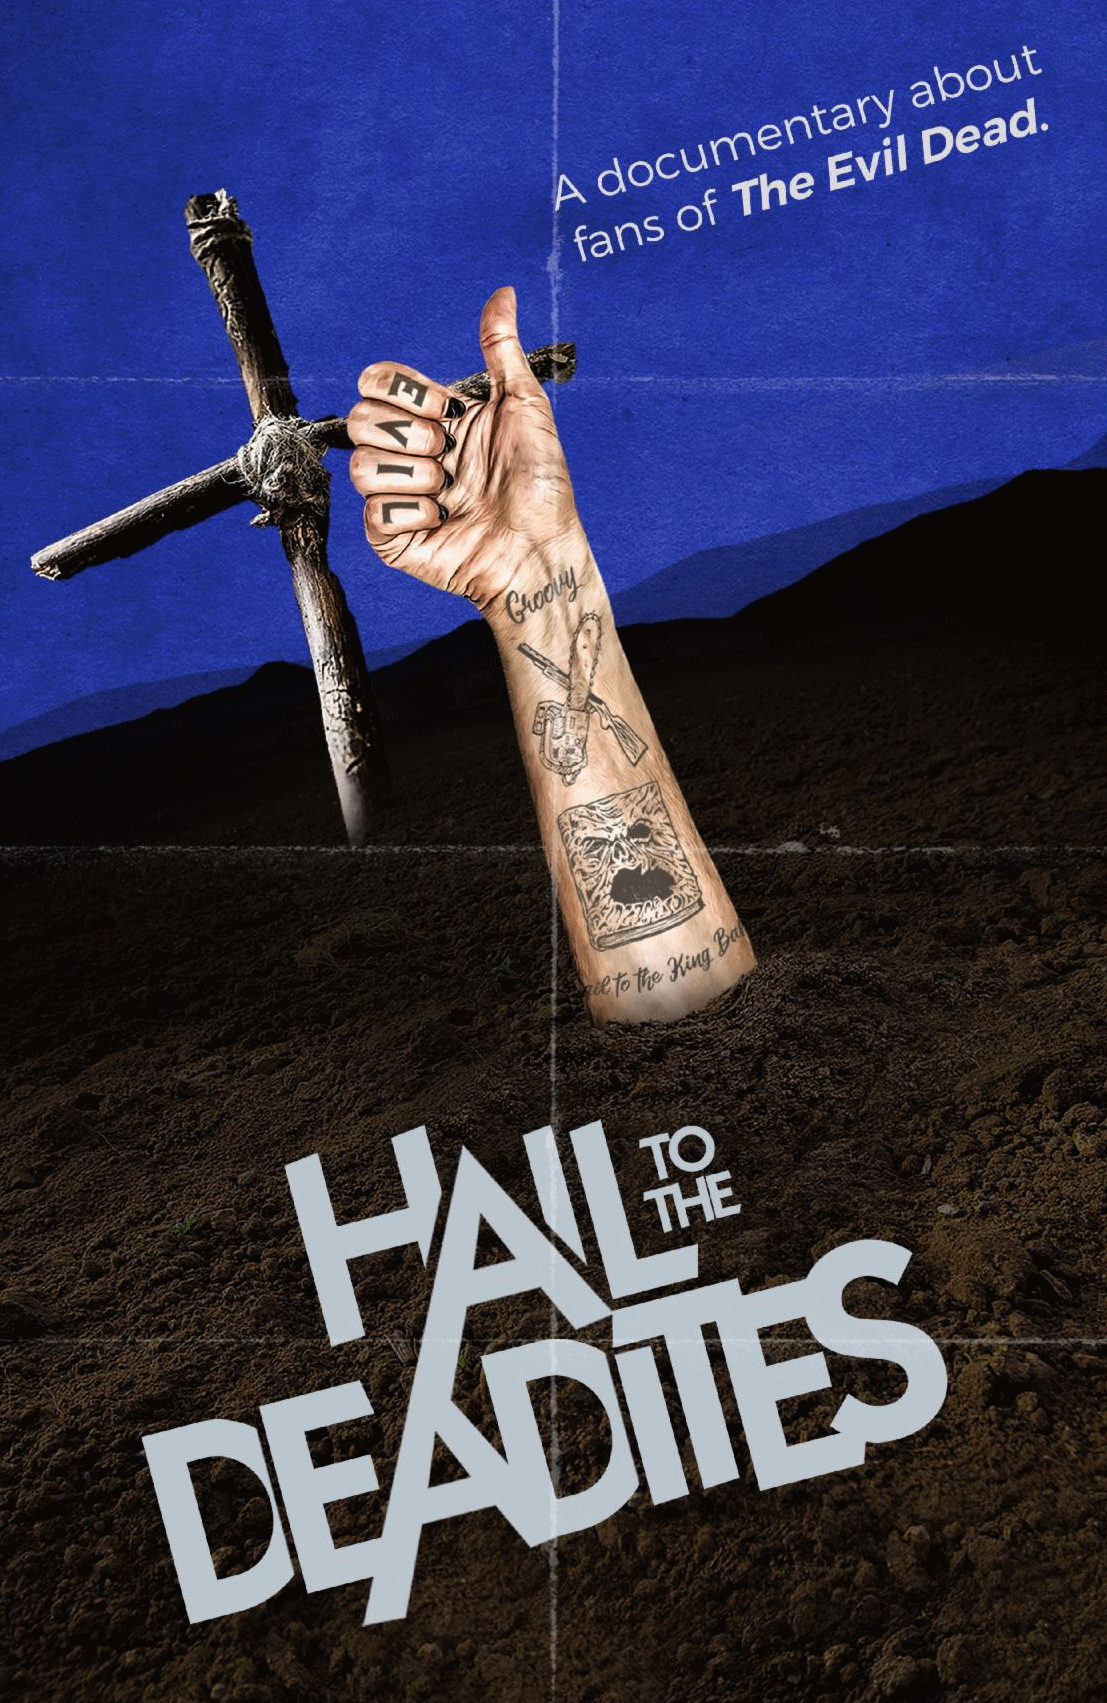 Film/documentaire : Hail to the Deadites